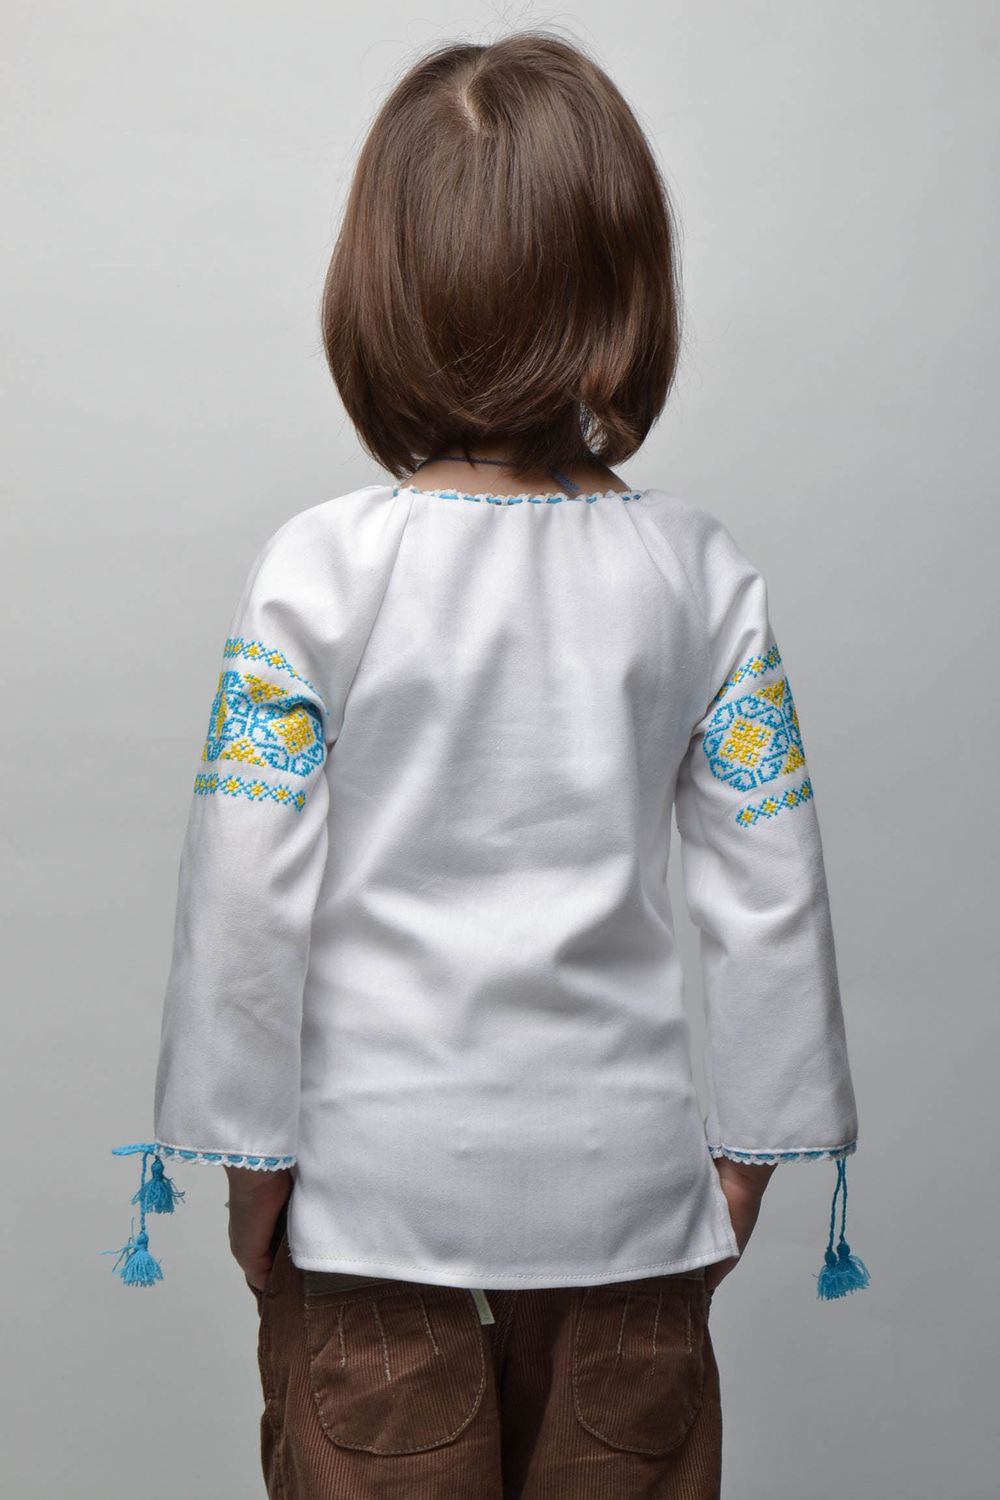 Embroidered shirt with long sleeves for 5-7 years old children photo 4